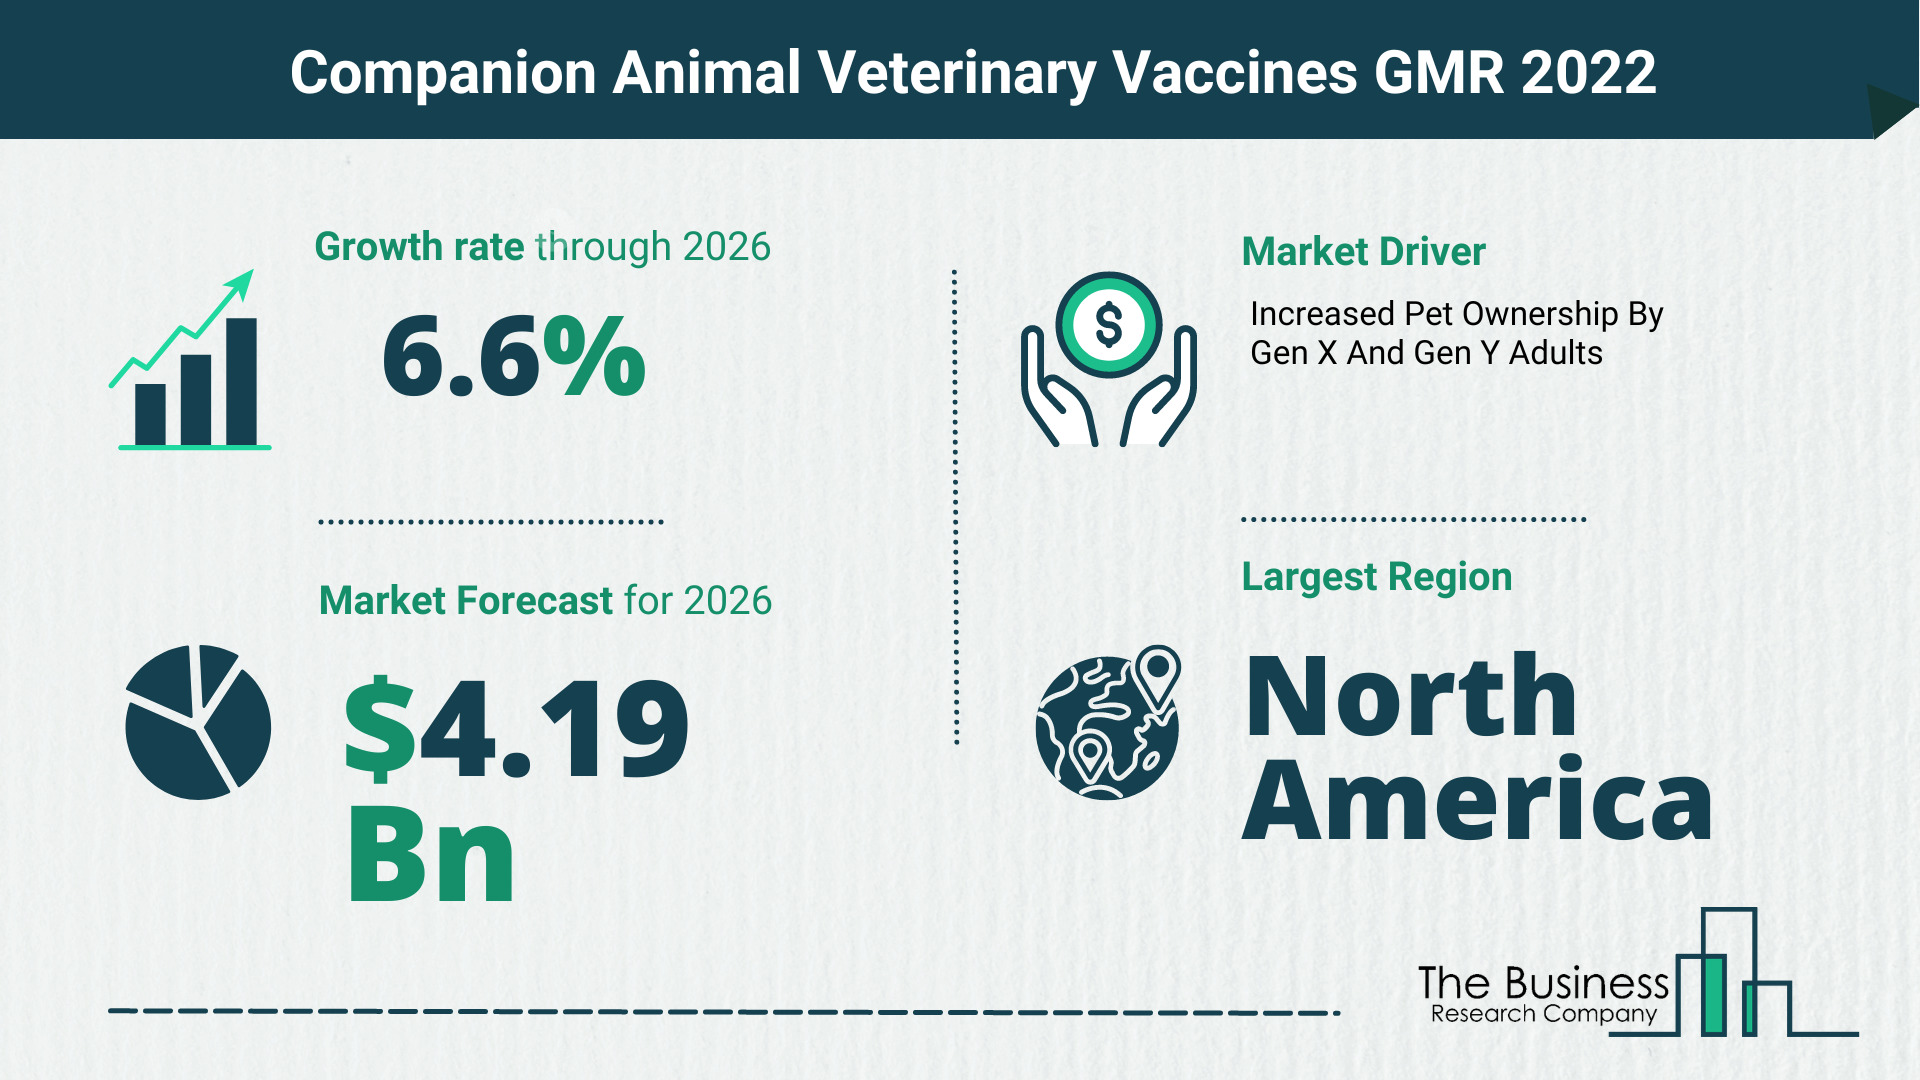 What Is The Companion Animal Veterinary Vaccines Market Overview In 2022?